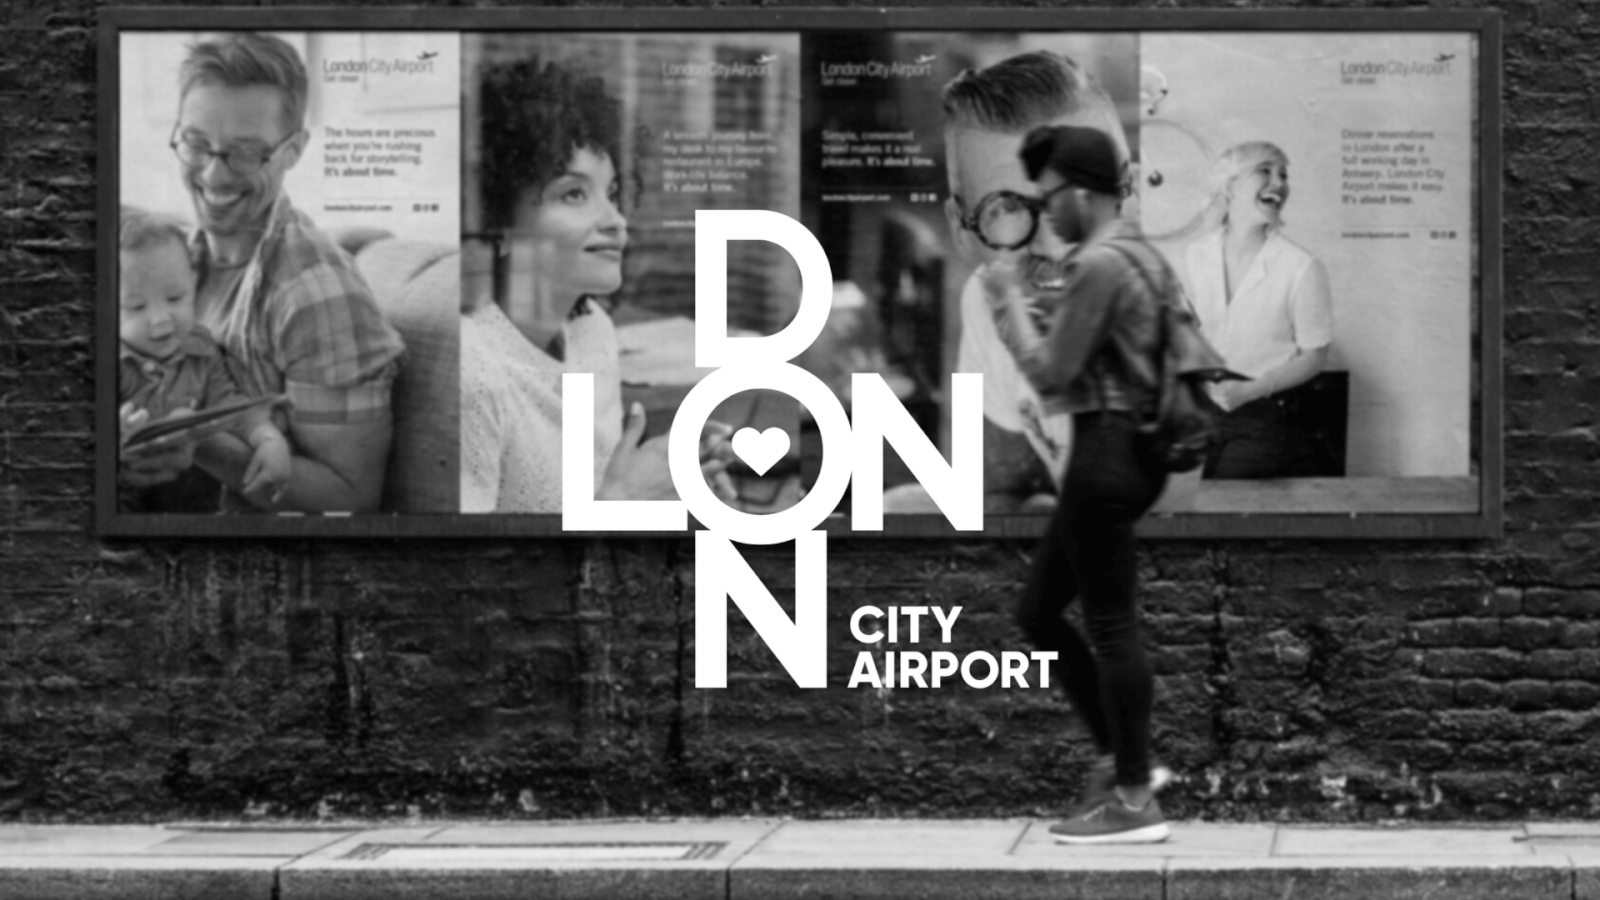 Positioning and re-brand for London City Airport